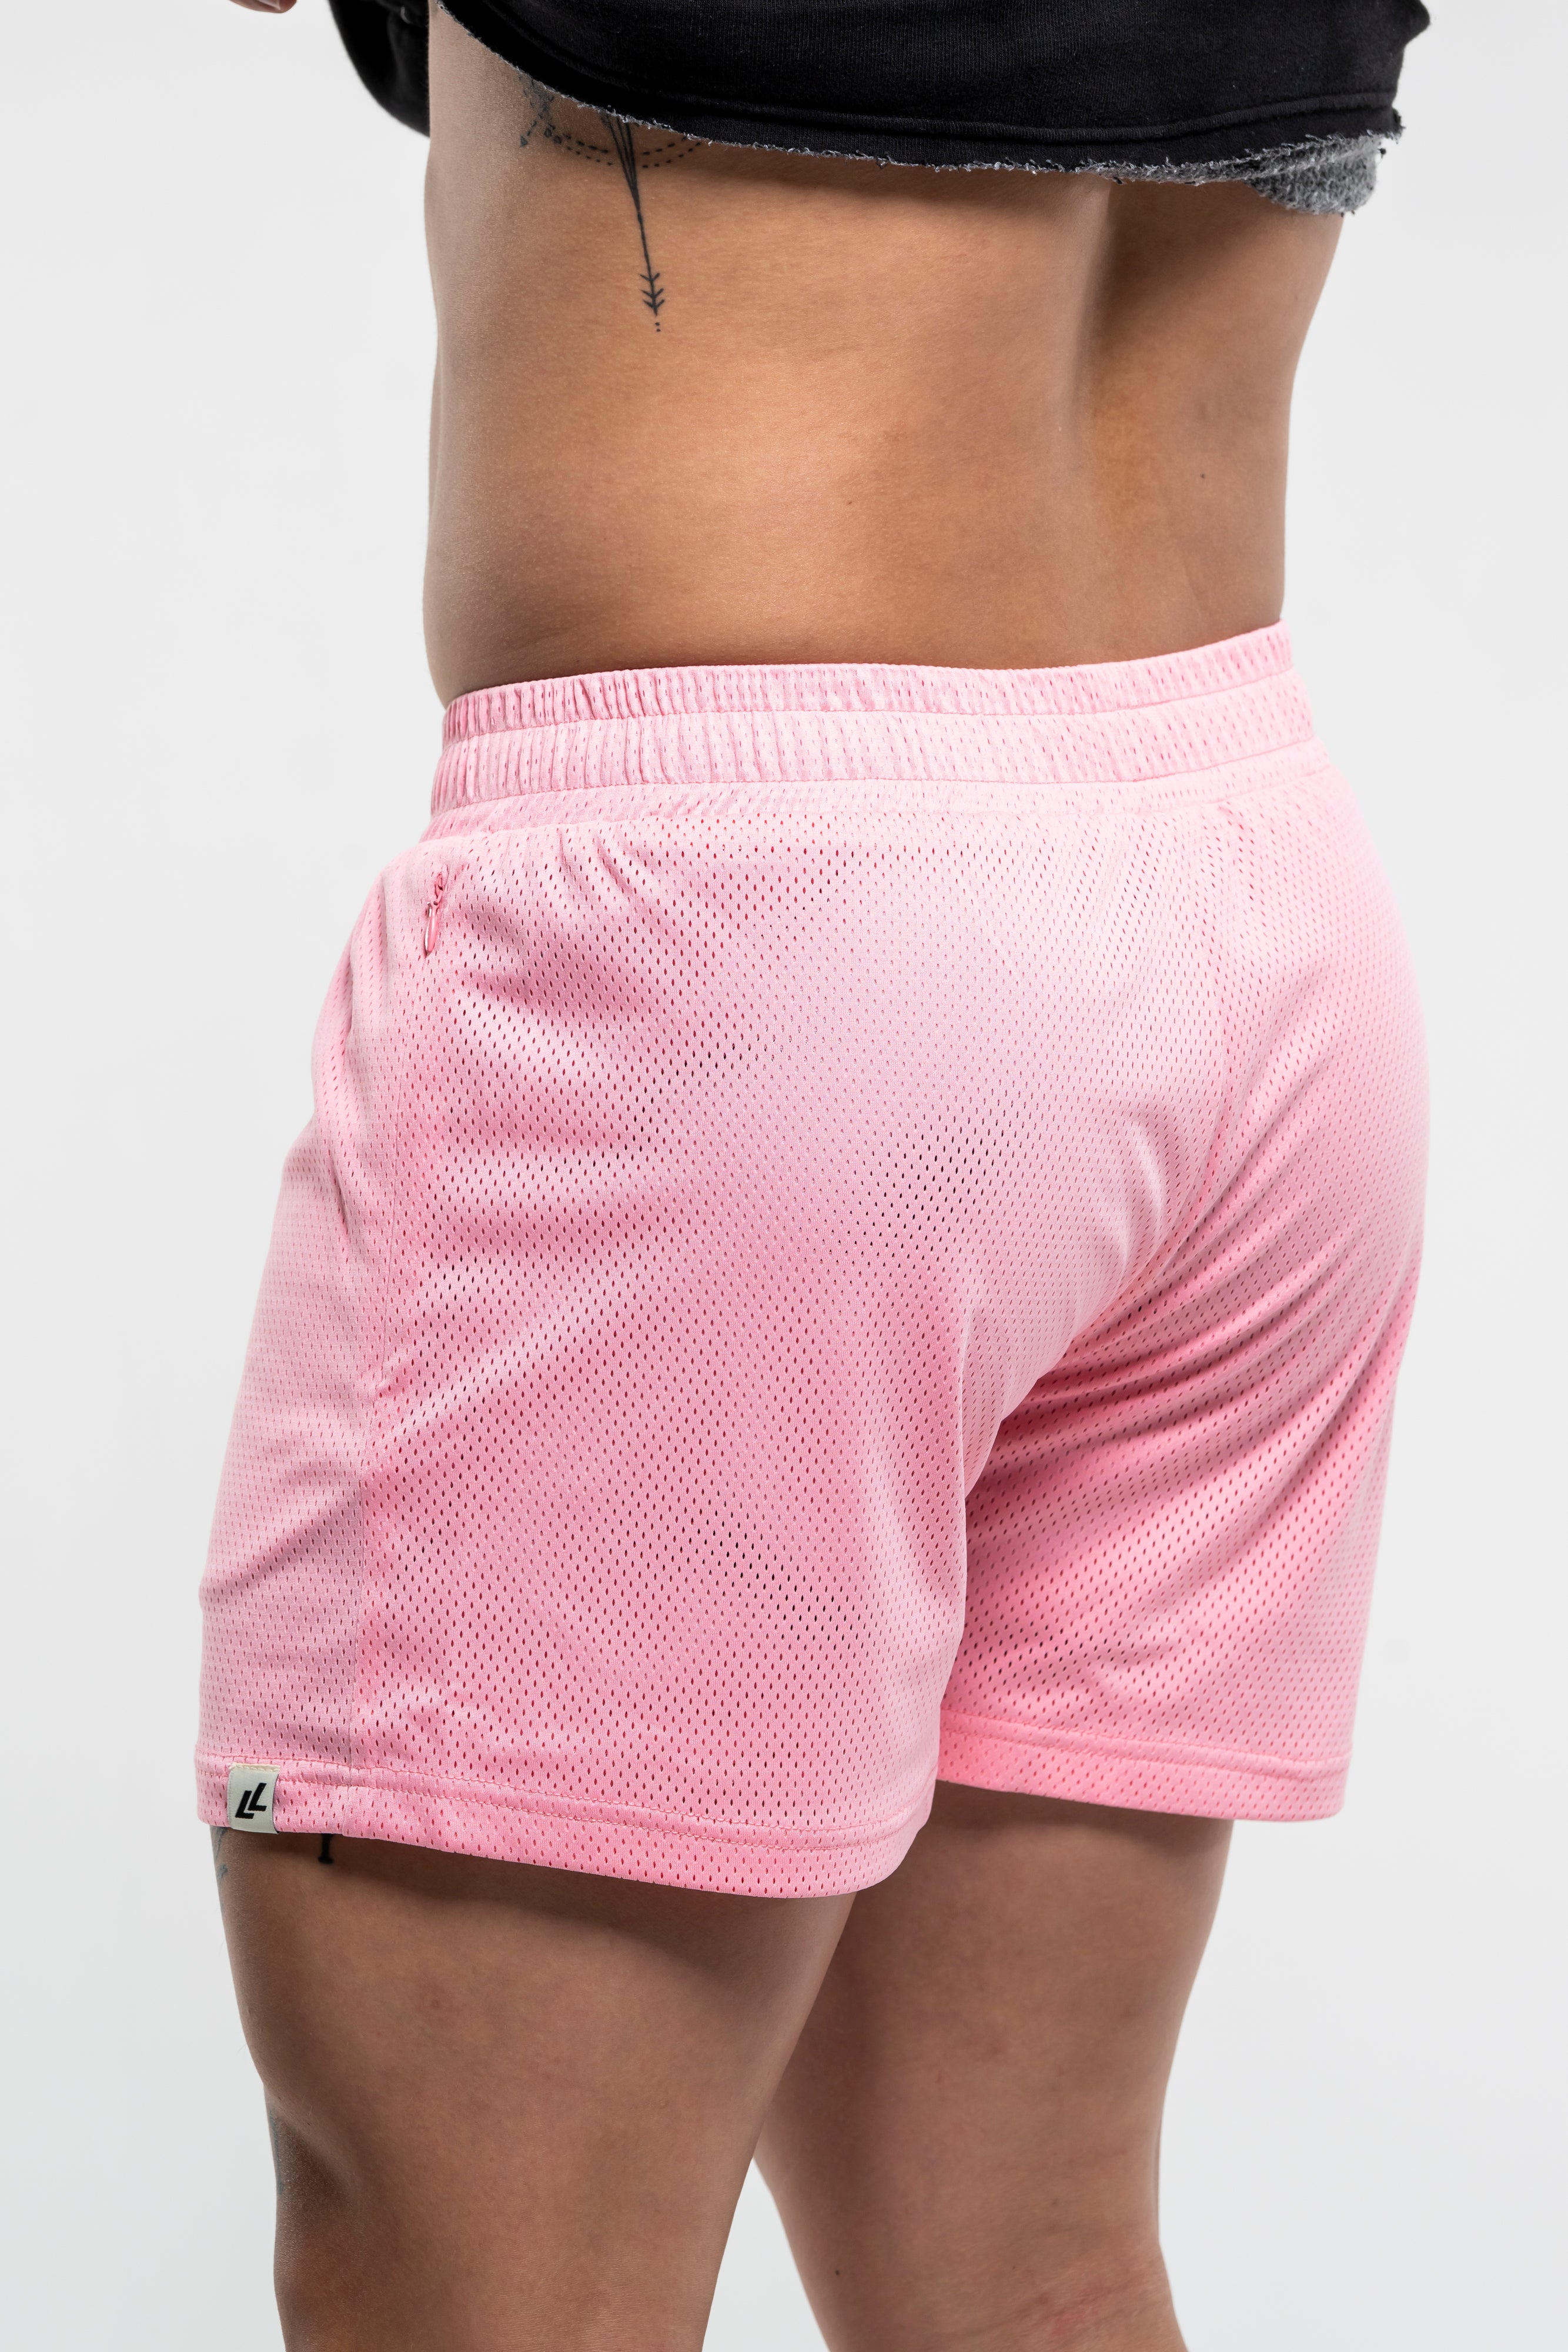 Pinkpulse Performers workout shorts